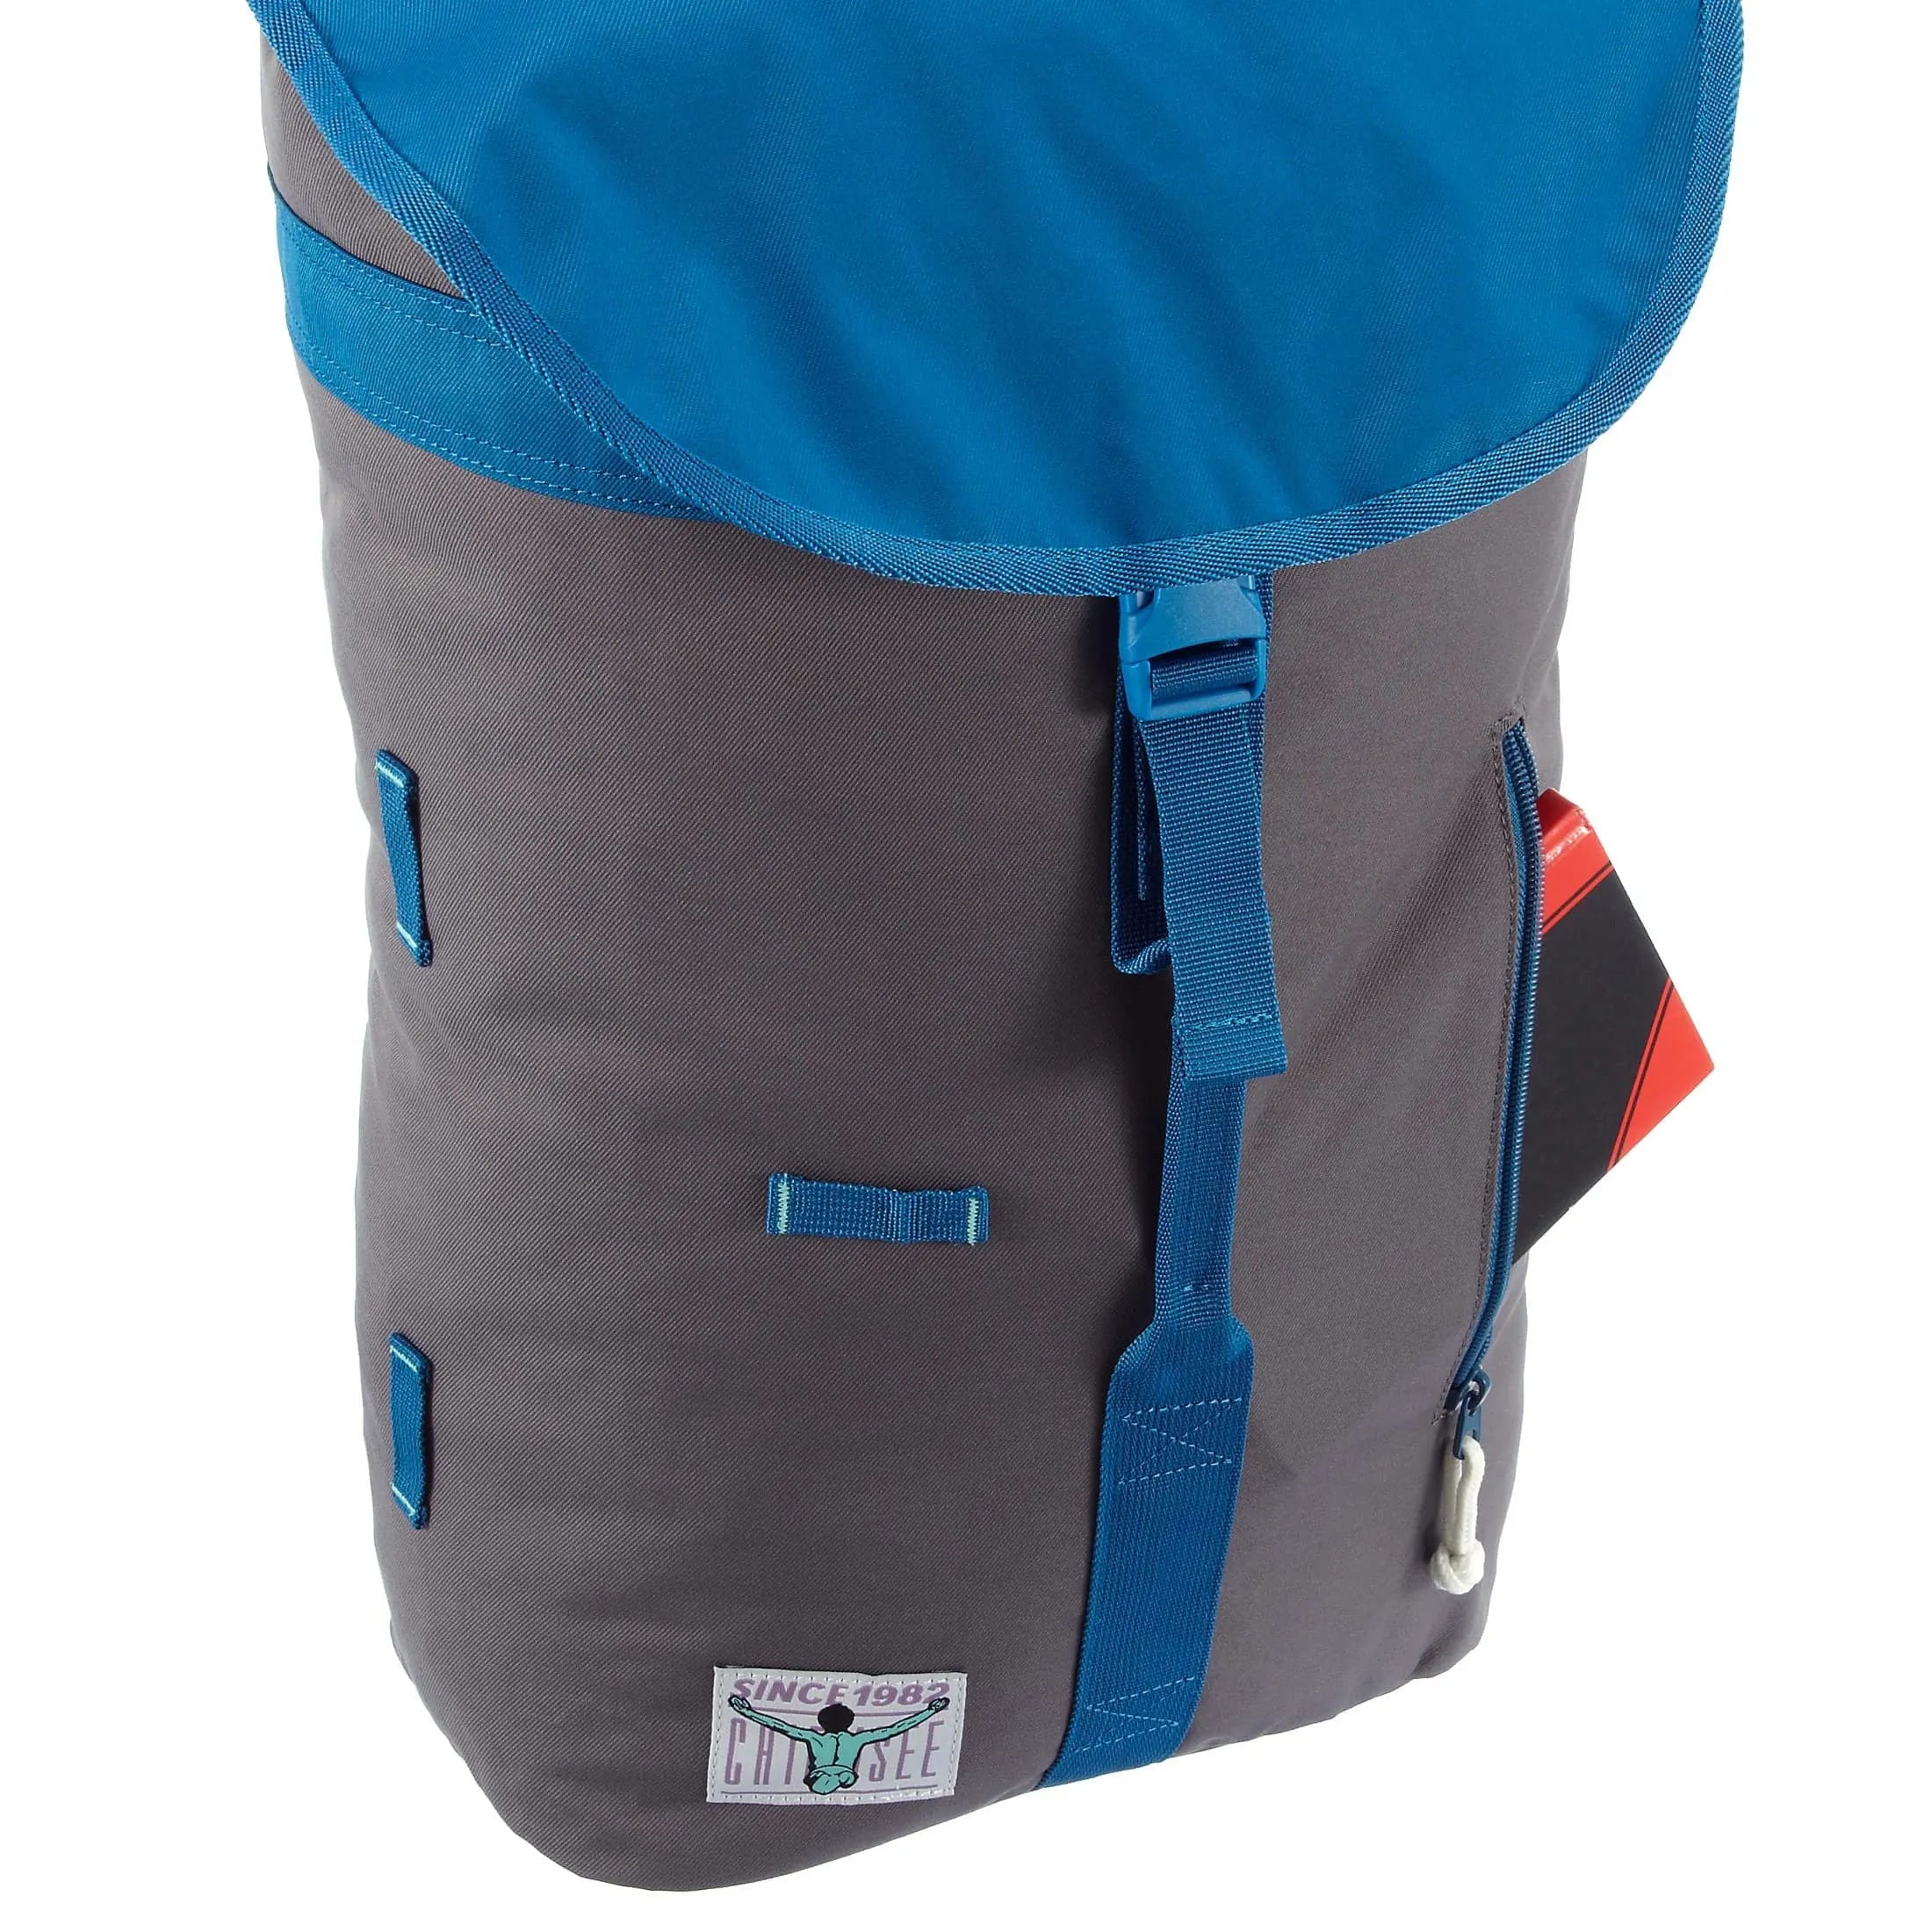 Chiemsee Urban Explorer Oslo backpack with laptop compartment 45 cm - excalibur blue saphire